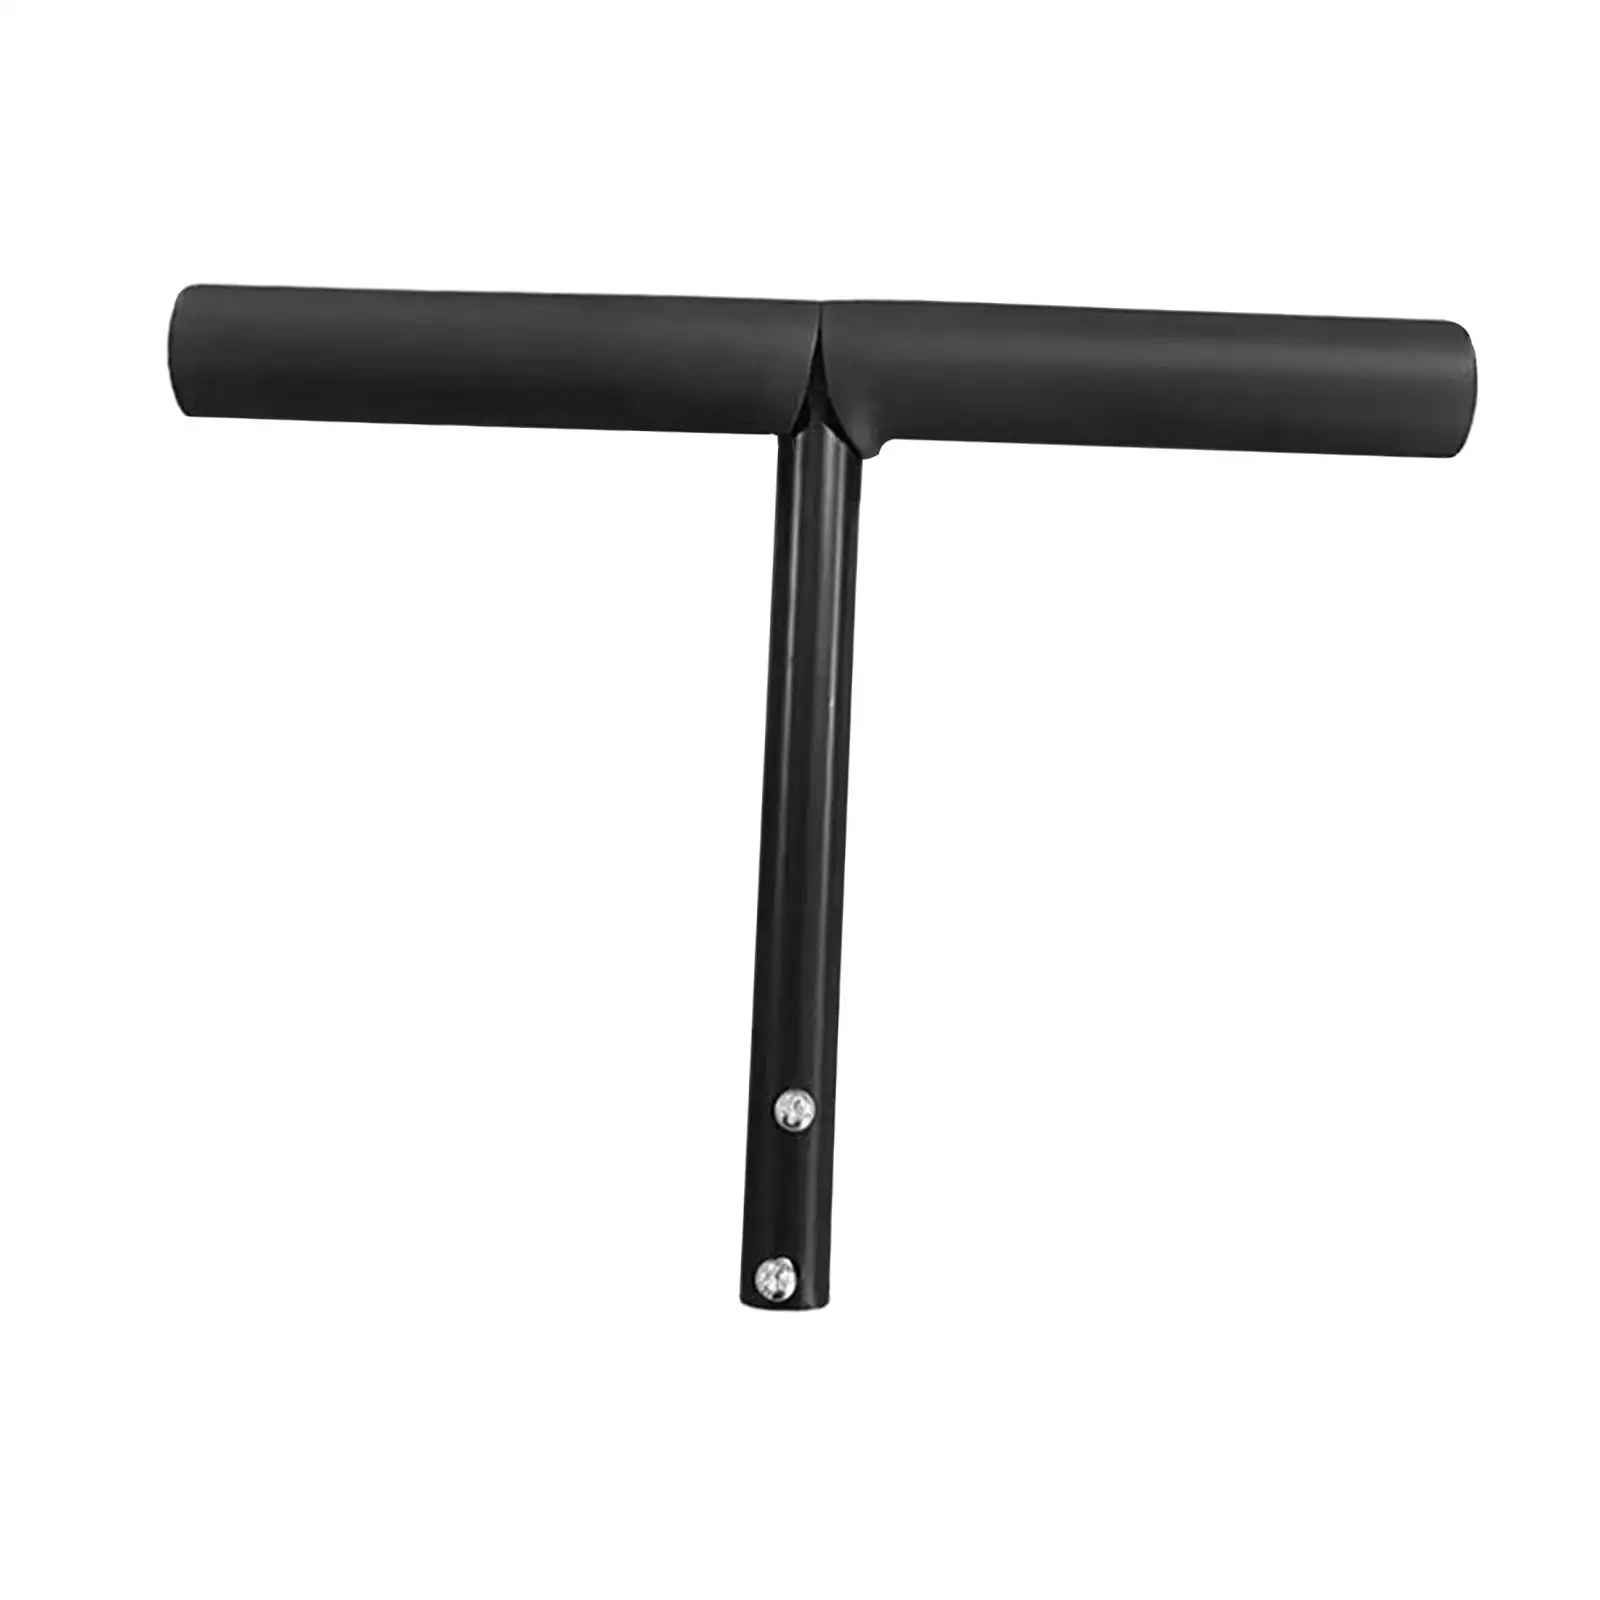 T Shaped Push Handle Bar Baby Bike Accessory Practical Easy to Install for Outdoor, Travel